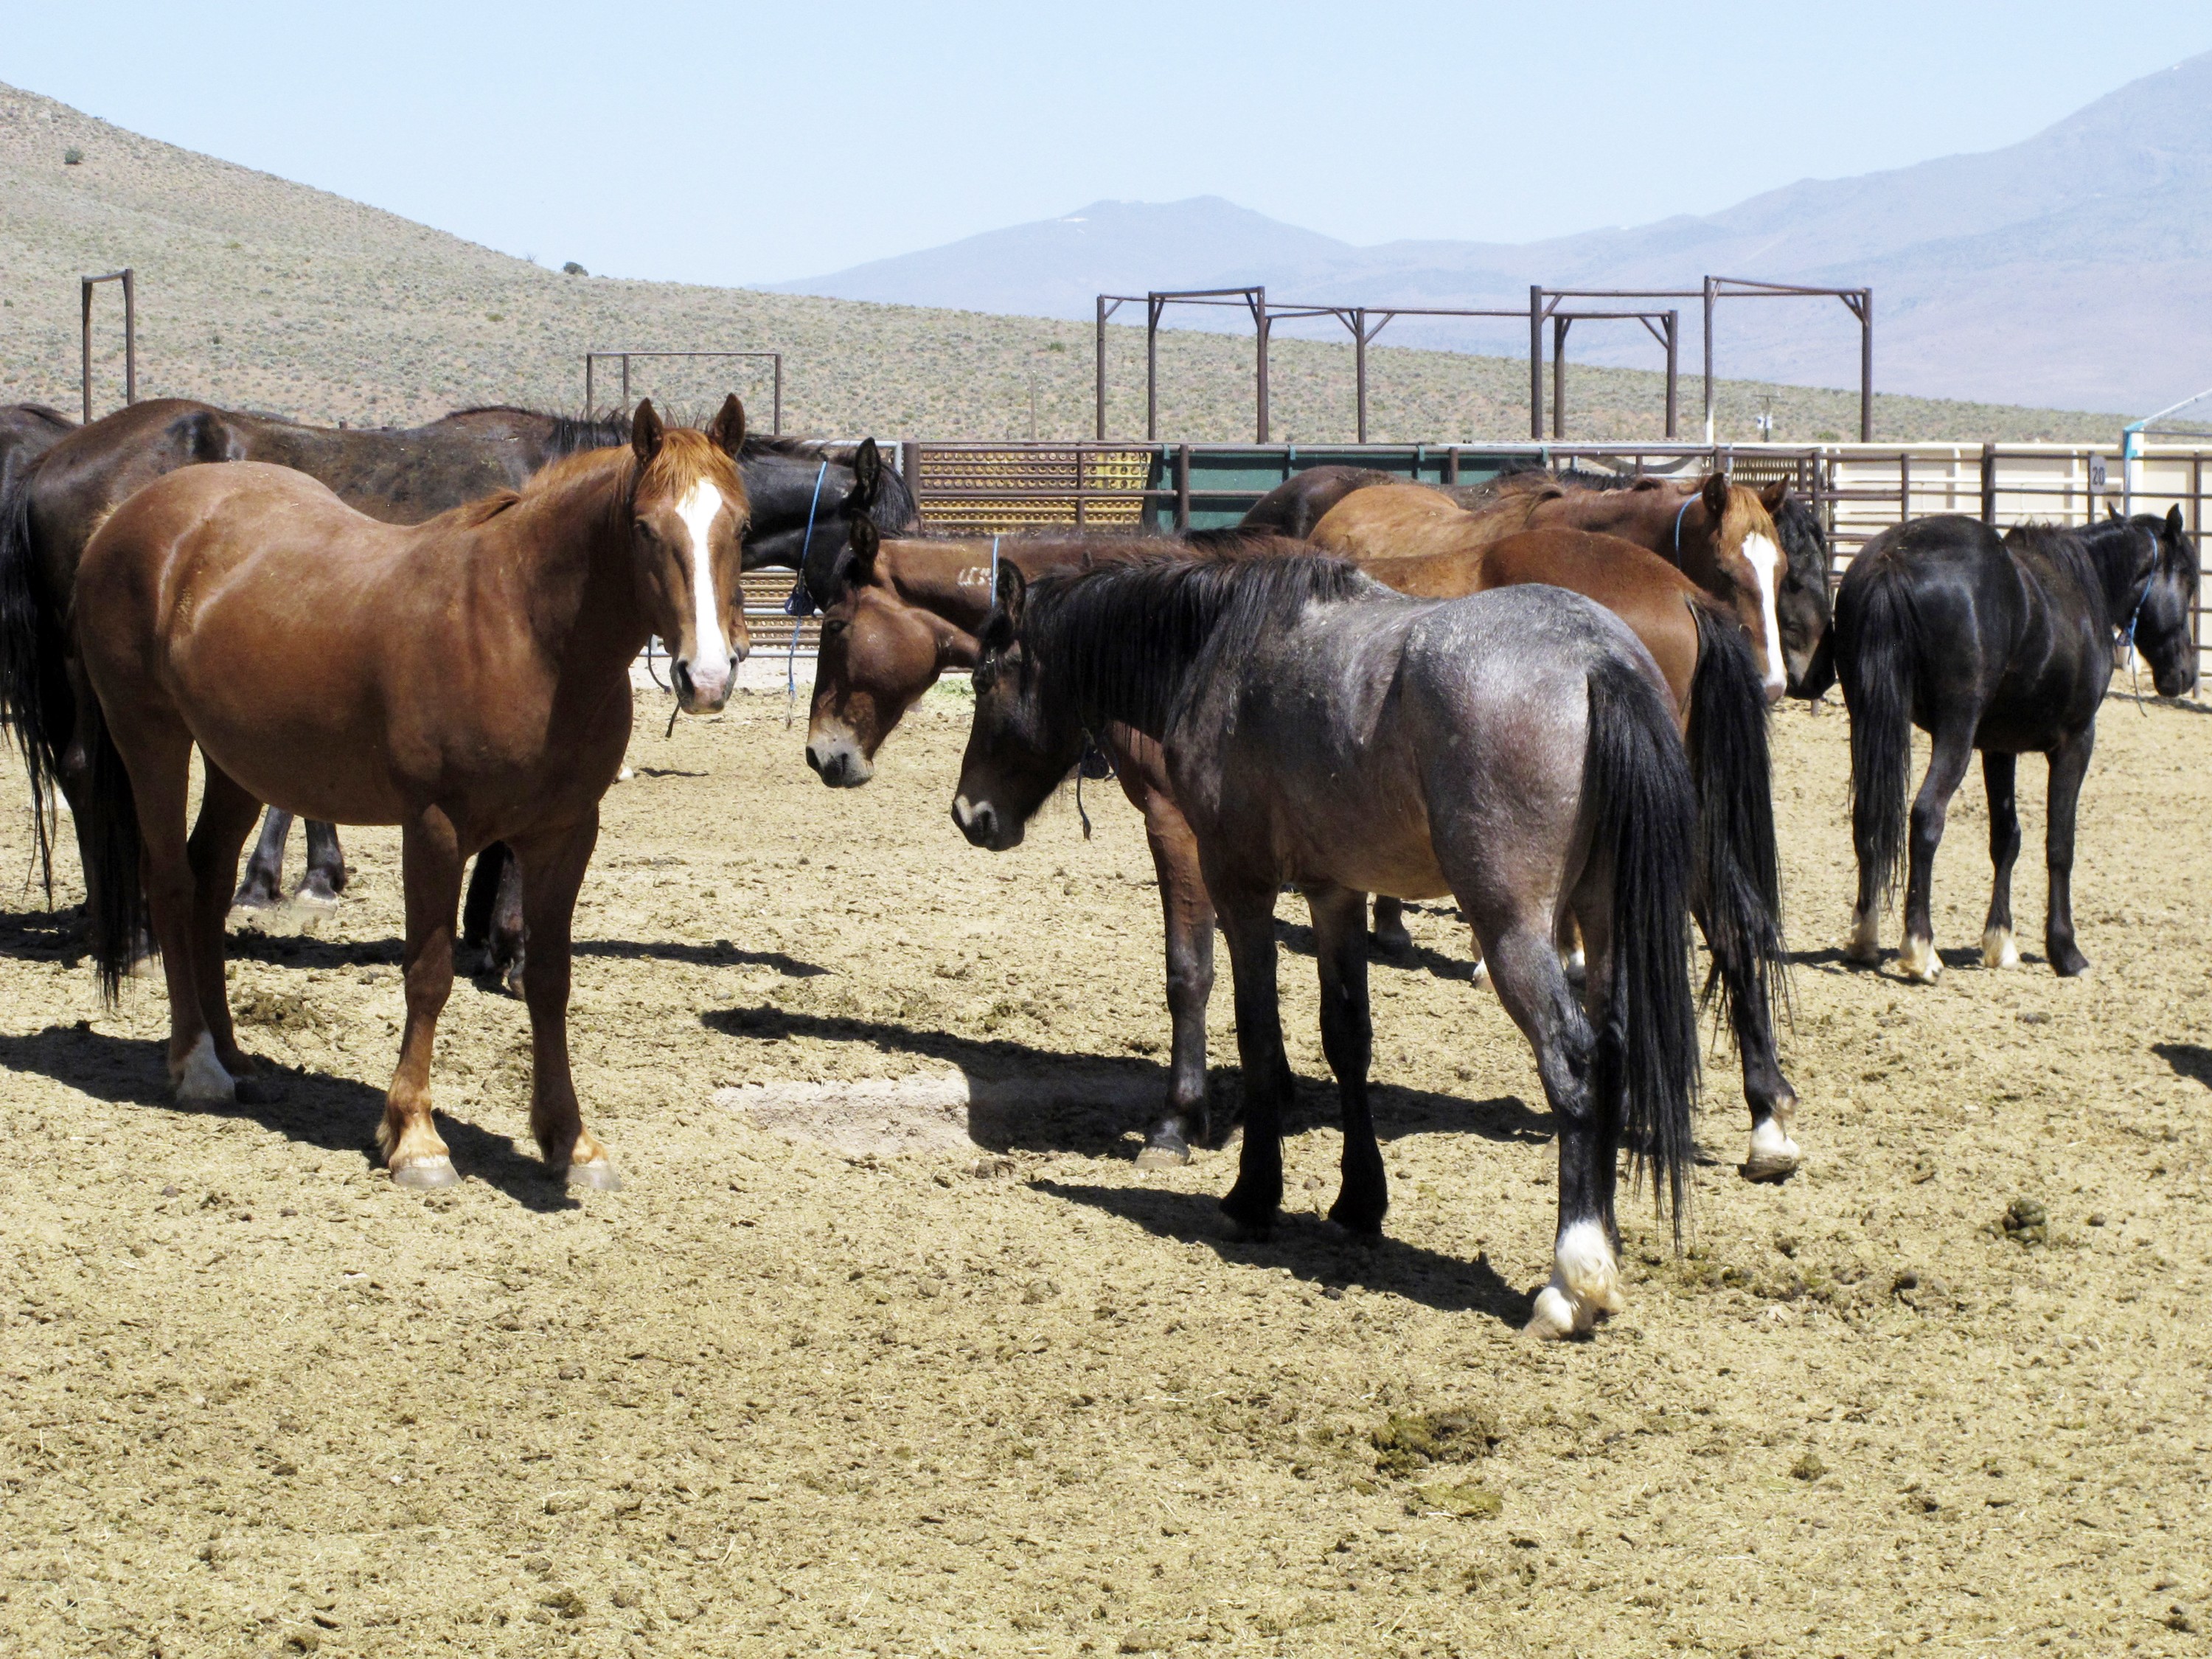 Congress fights over whether to allow Interior to kill wild horses